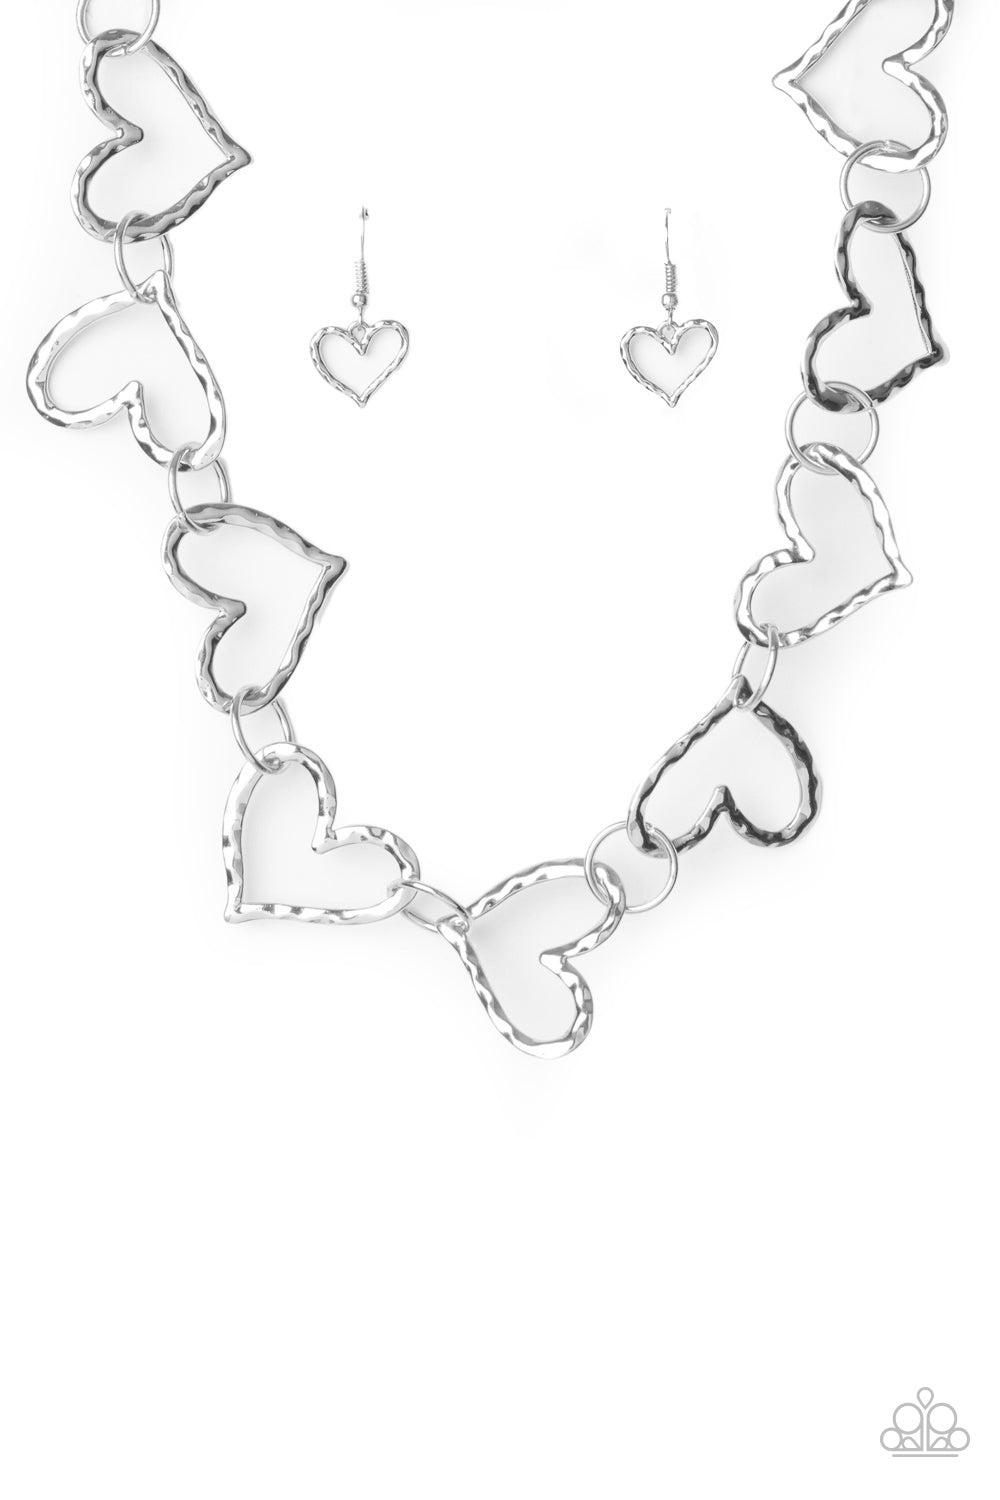 Paparazzi Vintagely Valentine - Silver Necklace - A Finishing Touch 